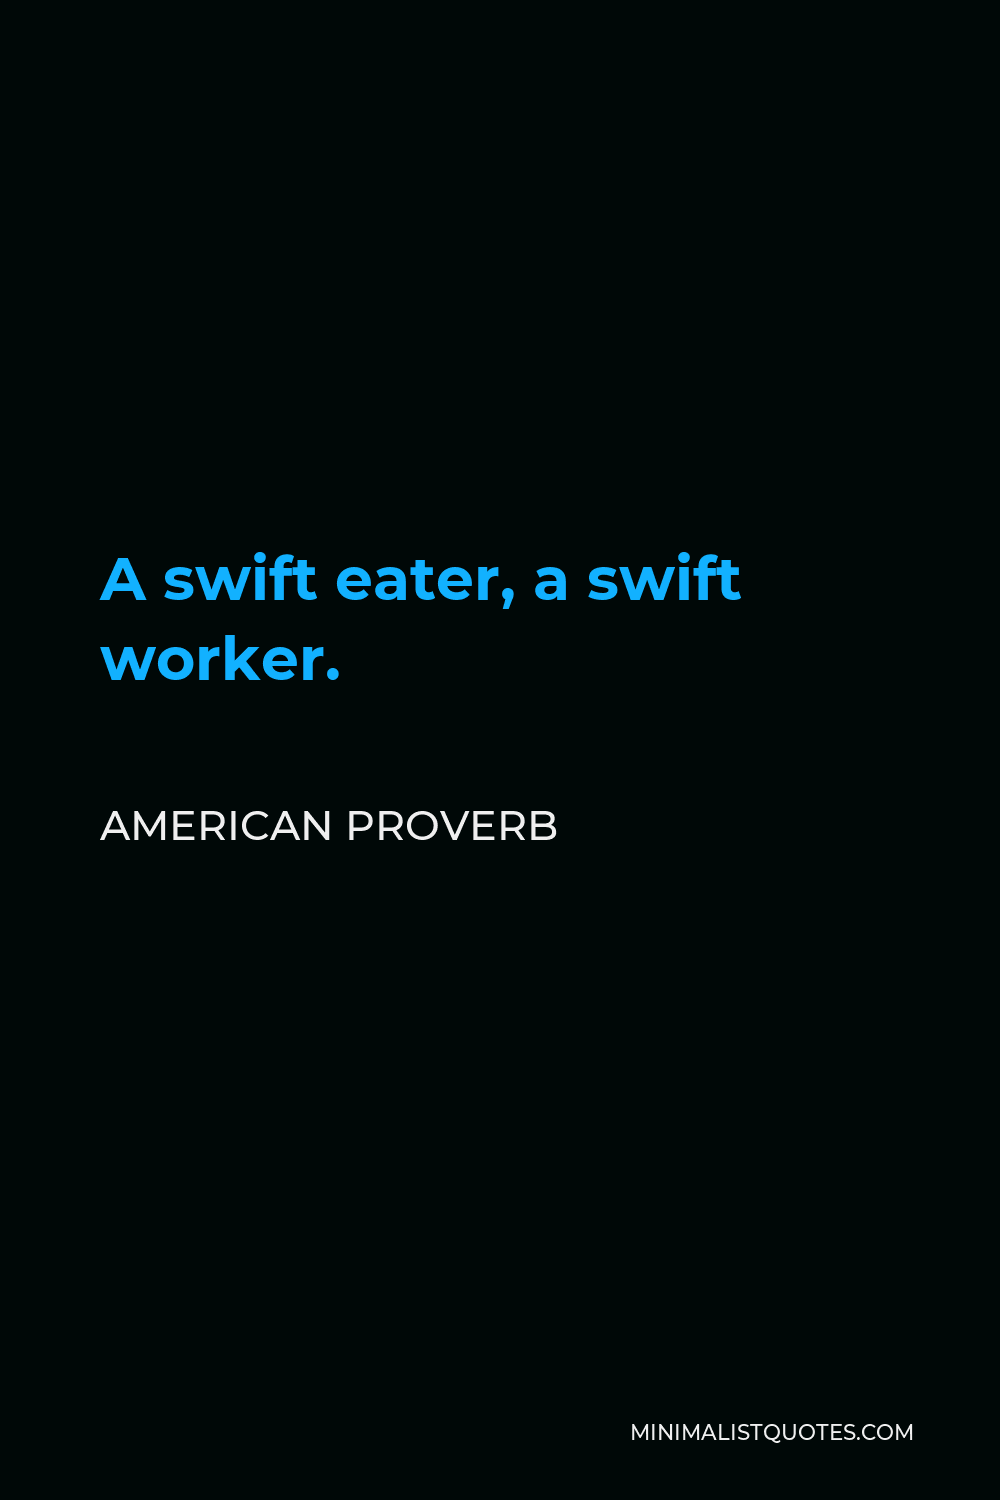 American Proverb Quote - A swift eater, a swift worker.